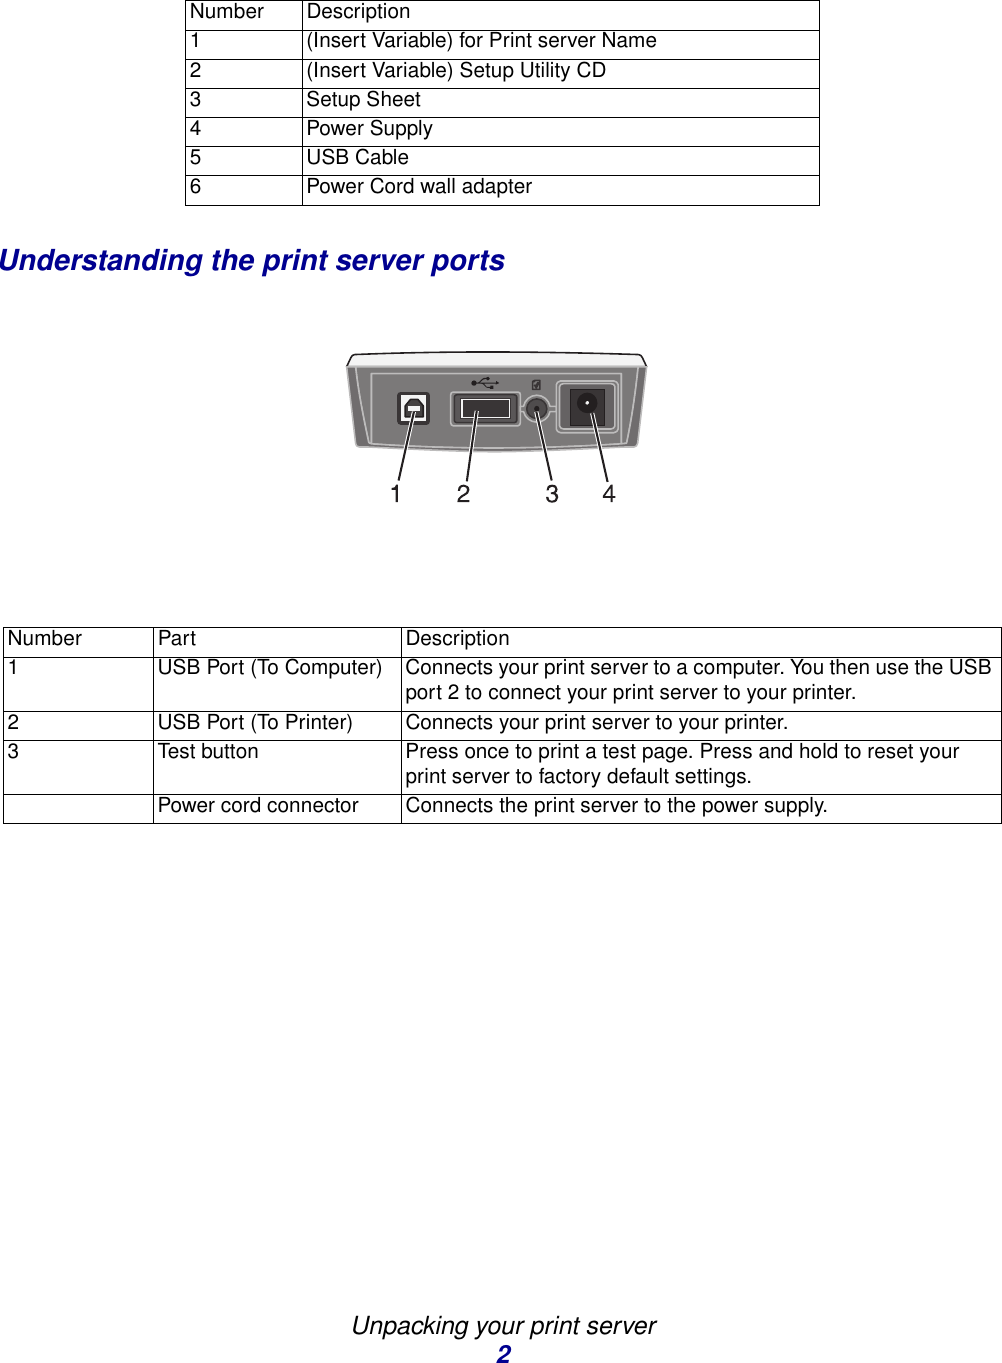 Unpacking your print server2Understanding the print server portsNumber Description1 (Insert Variable) for Print server Name2 (Insert Variable) Setup Utility CD3 Setup Sheet4 Power Supply5USB Cable6 Power Cord wall adapterNumber Part Description1 USB Port (To Computer) Connects your print server to a computer. You then use the USB port 2 to connect your print server to your printer.2 USB Port (To Printer) Connects your print server to your printer.3 Test button Press once to print a test page. Press and hold to reset your print server to factory default settings. Power cord connector Connects the print server to the power supply. 